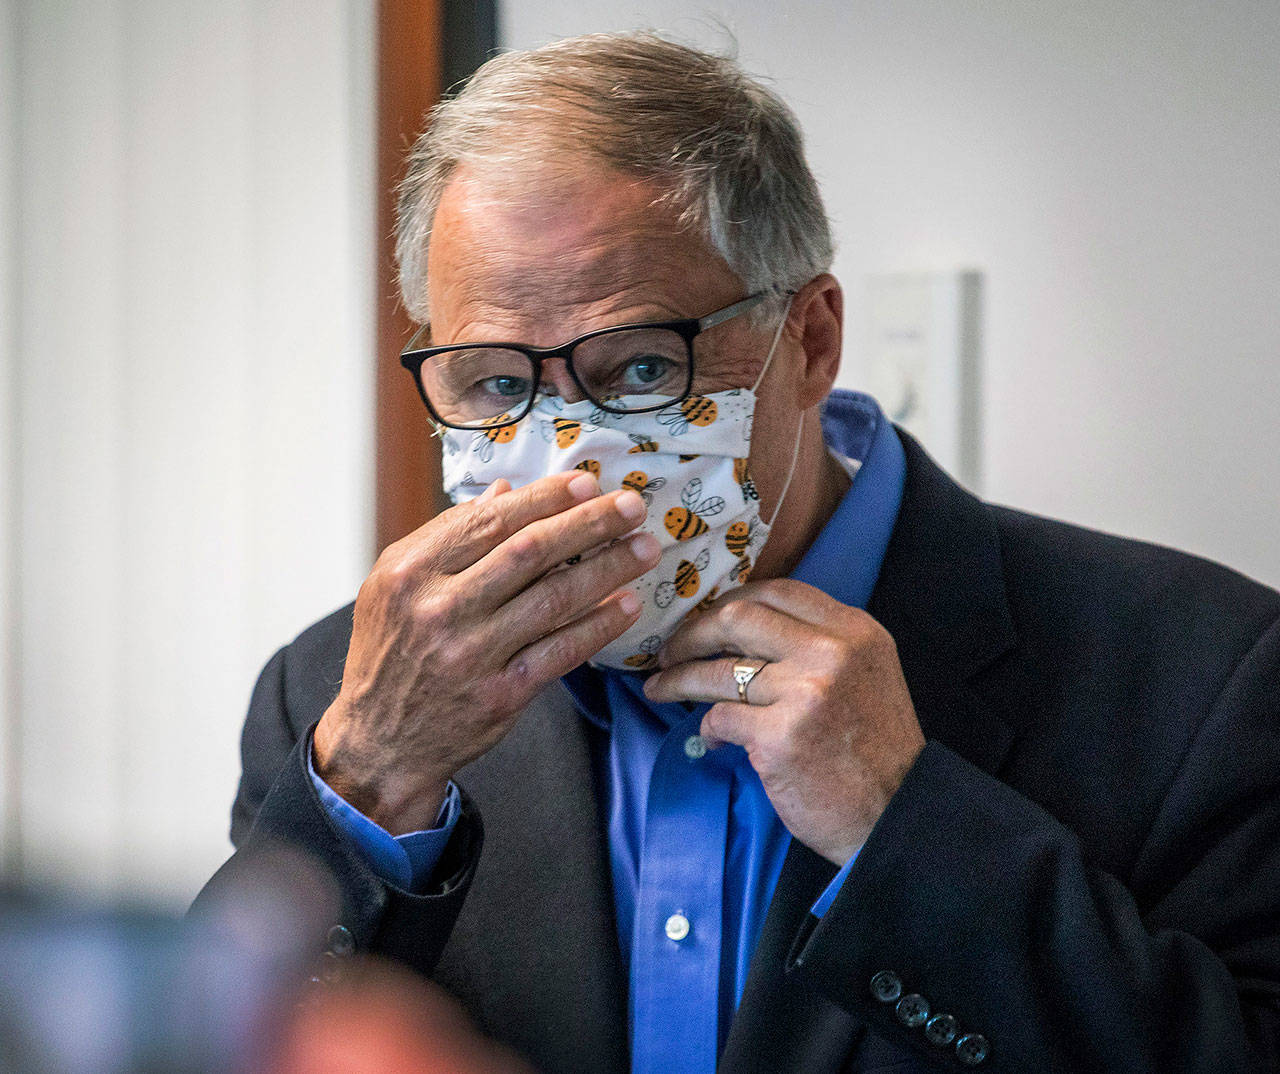 In this file photo, Washington Gov. Jay Inslee puts on his face mask after speaking to the media, Wednesday, May 20, 2020, in Tumwater, Wash. (Steve Ringman/The Seattle Times via AP, Pool)